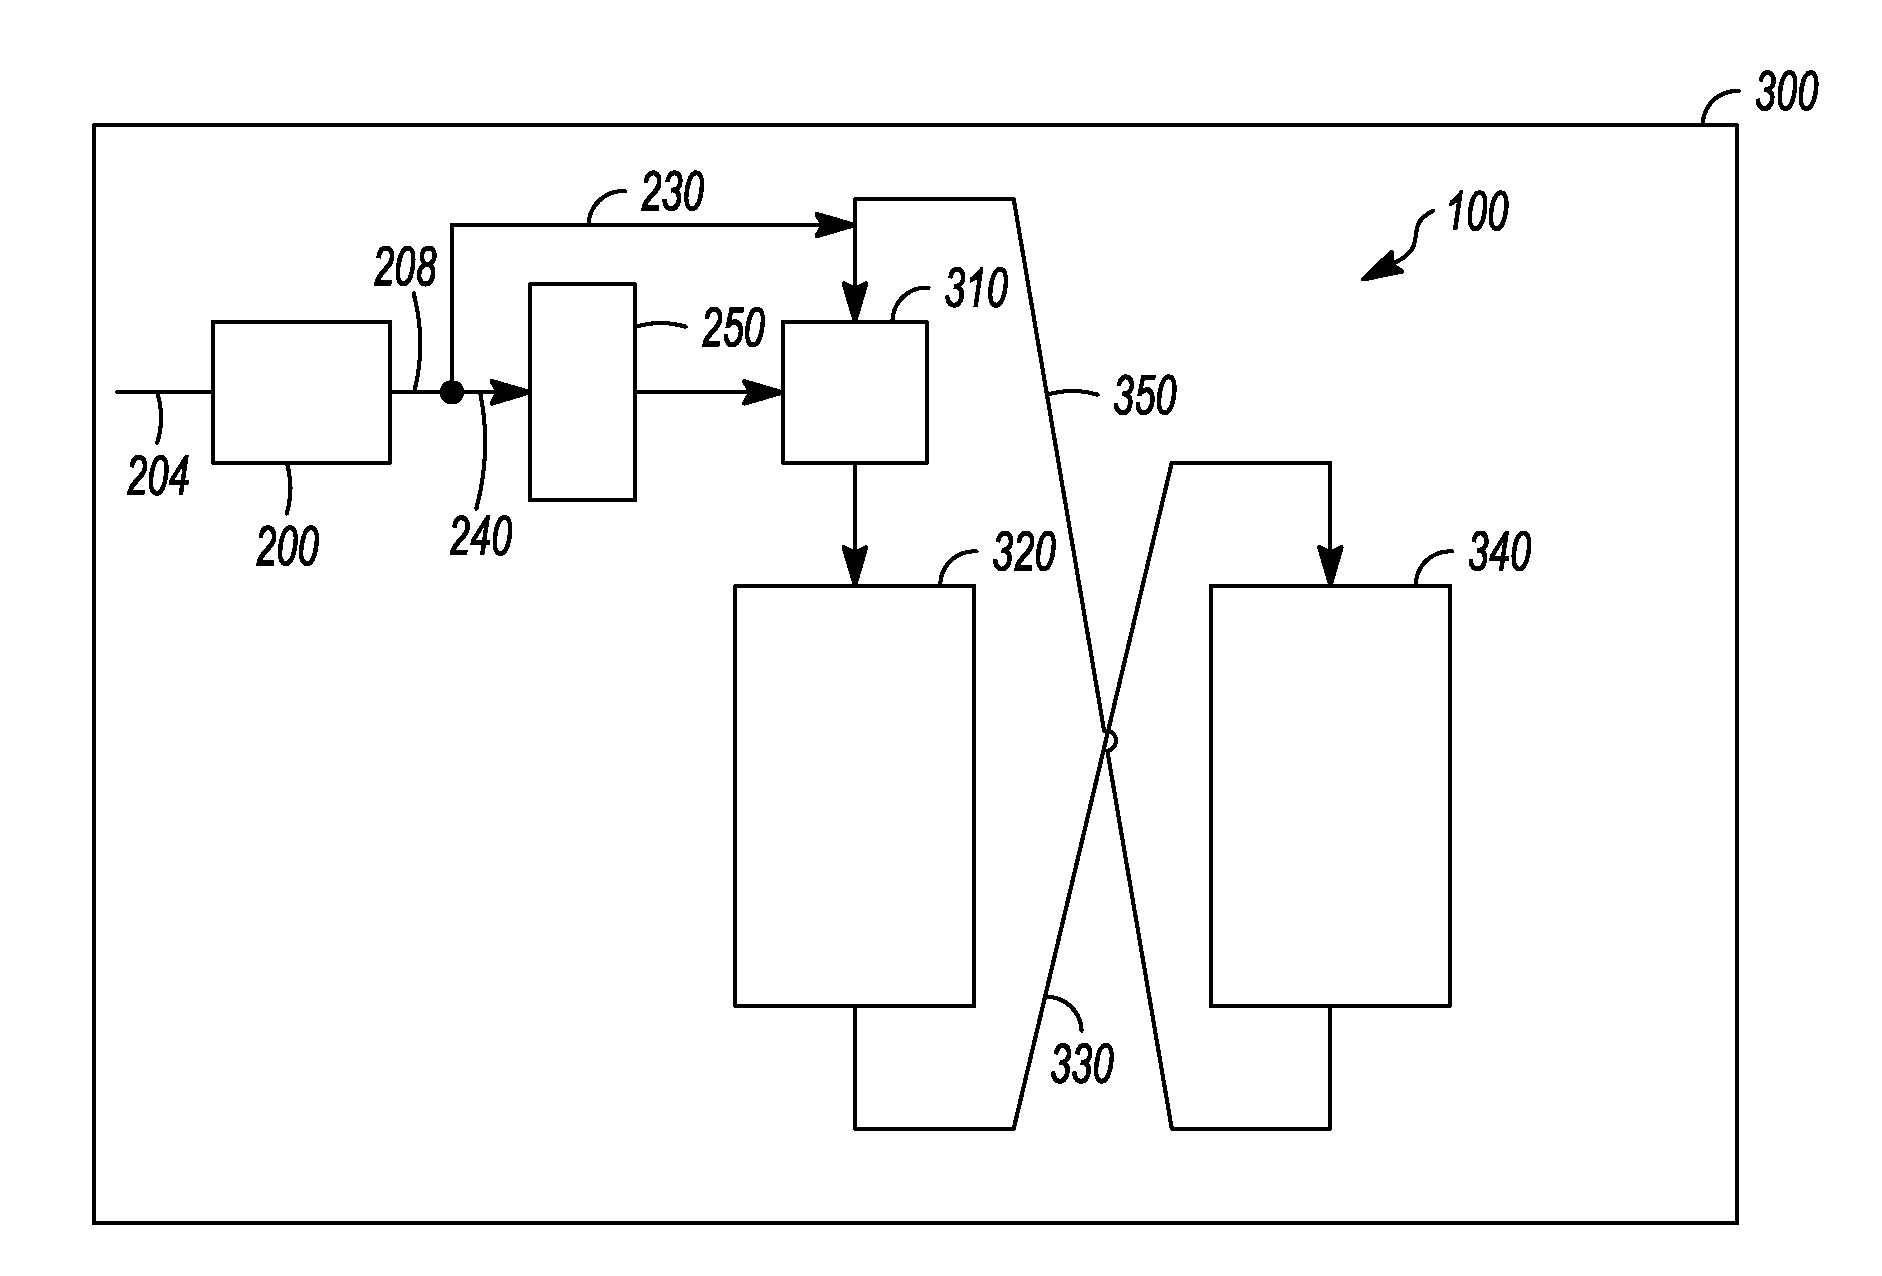 Apparatus and process for removal of carbon monoxide